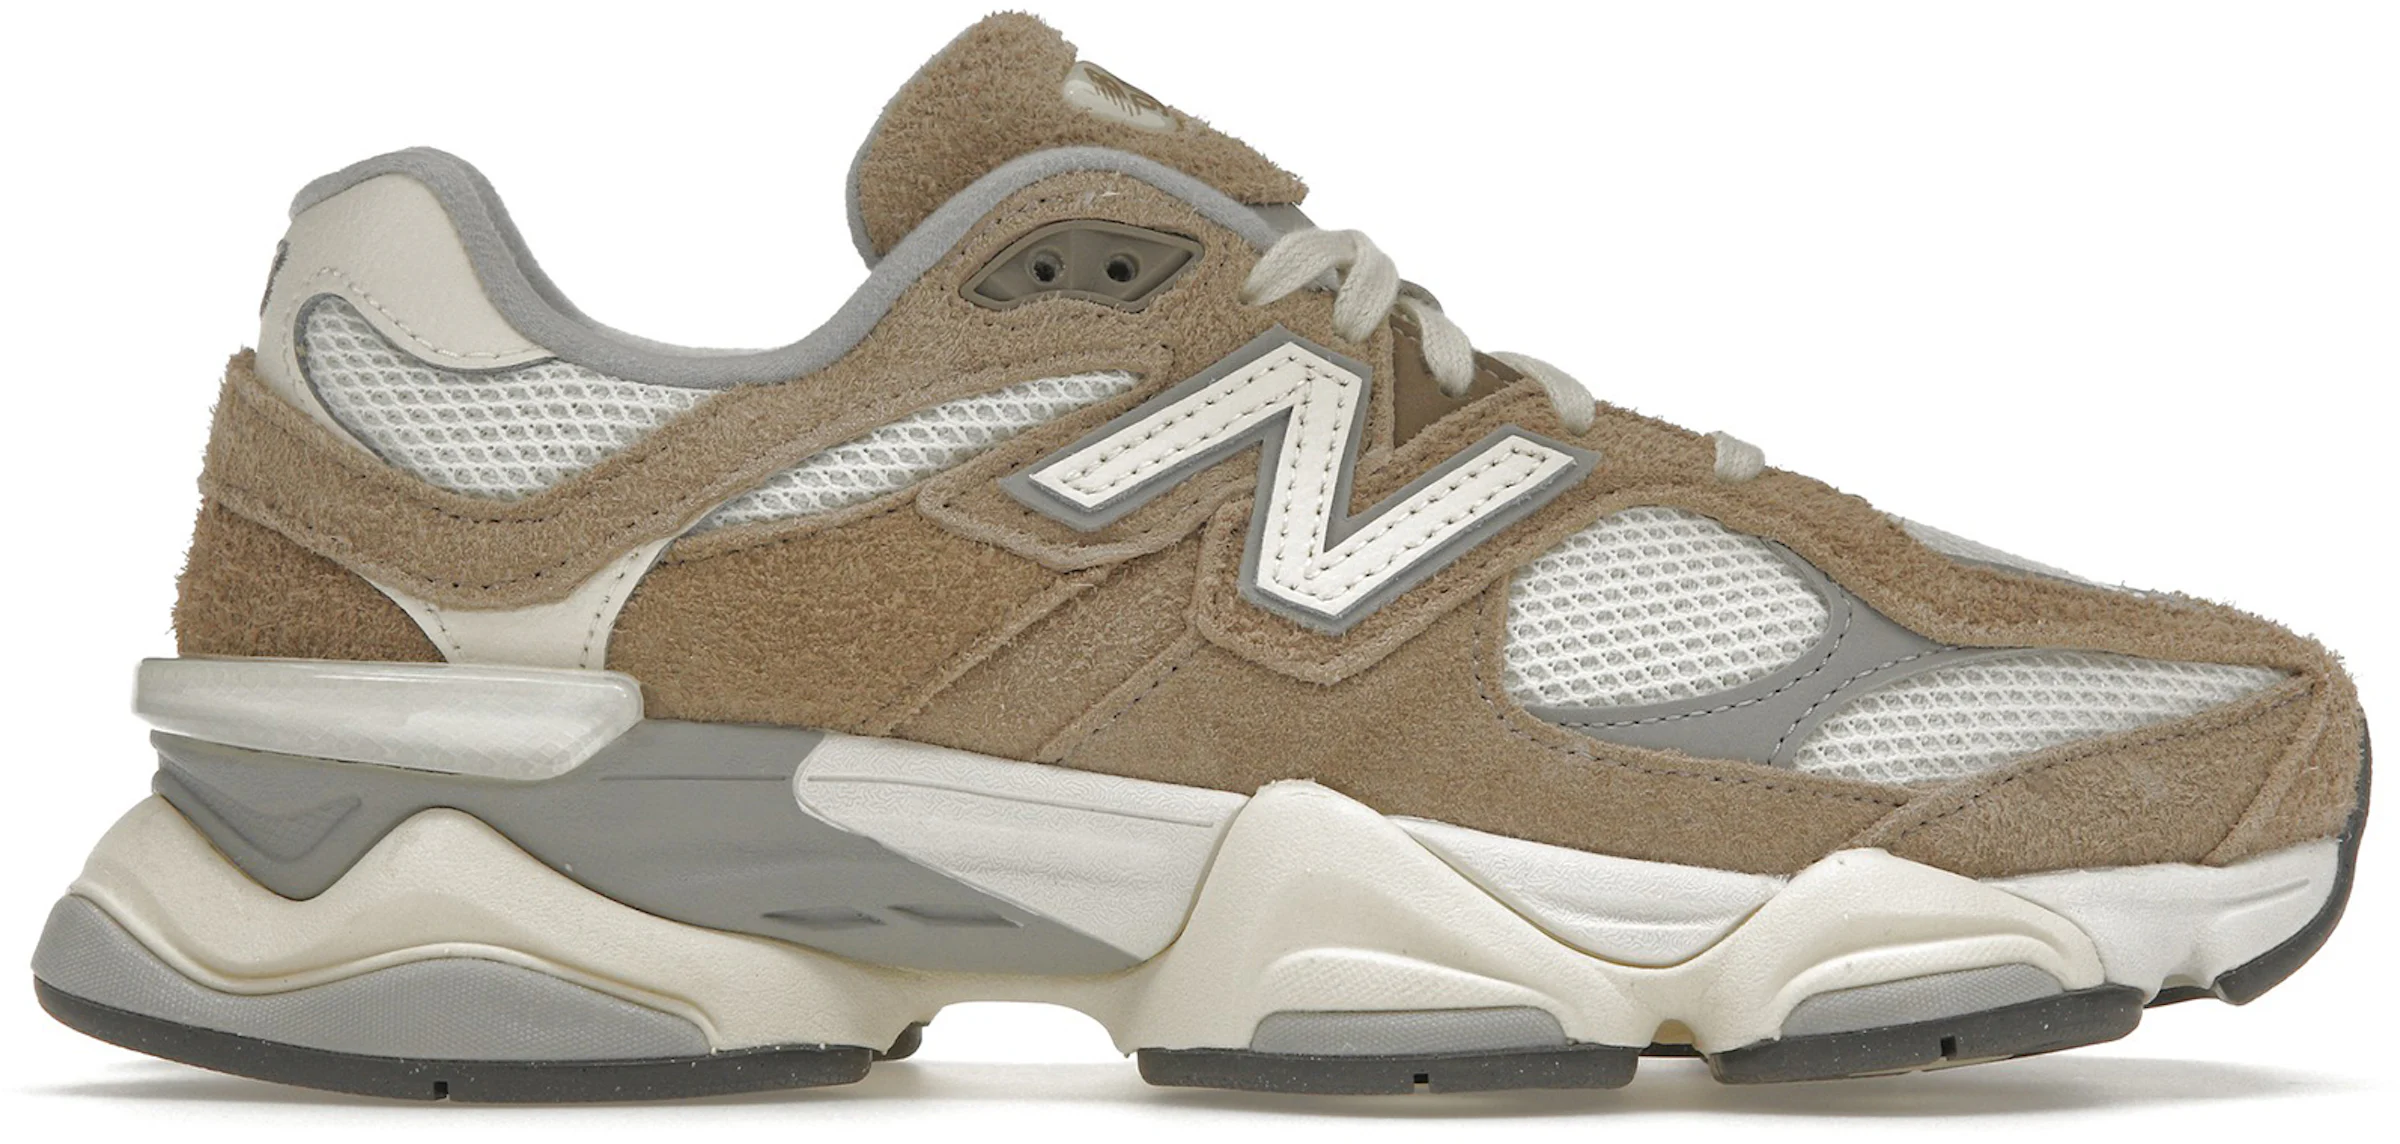 New Balance 9060 trainers in tan